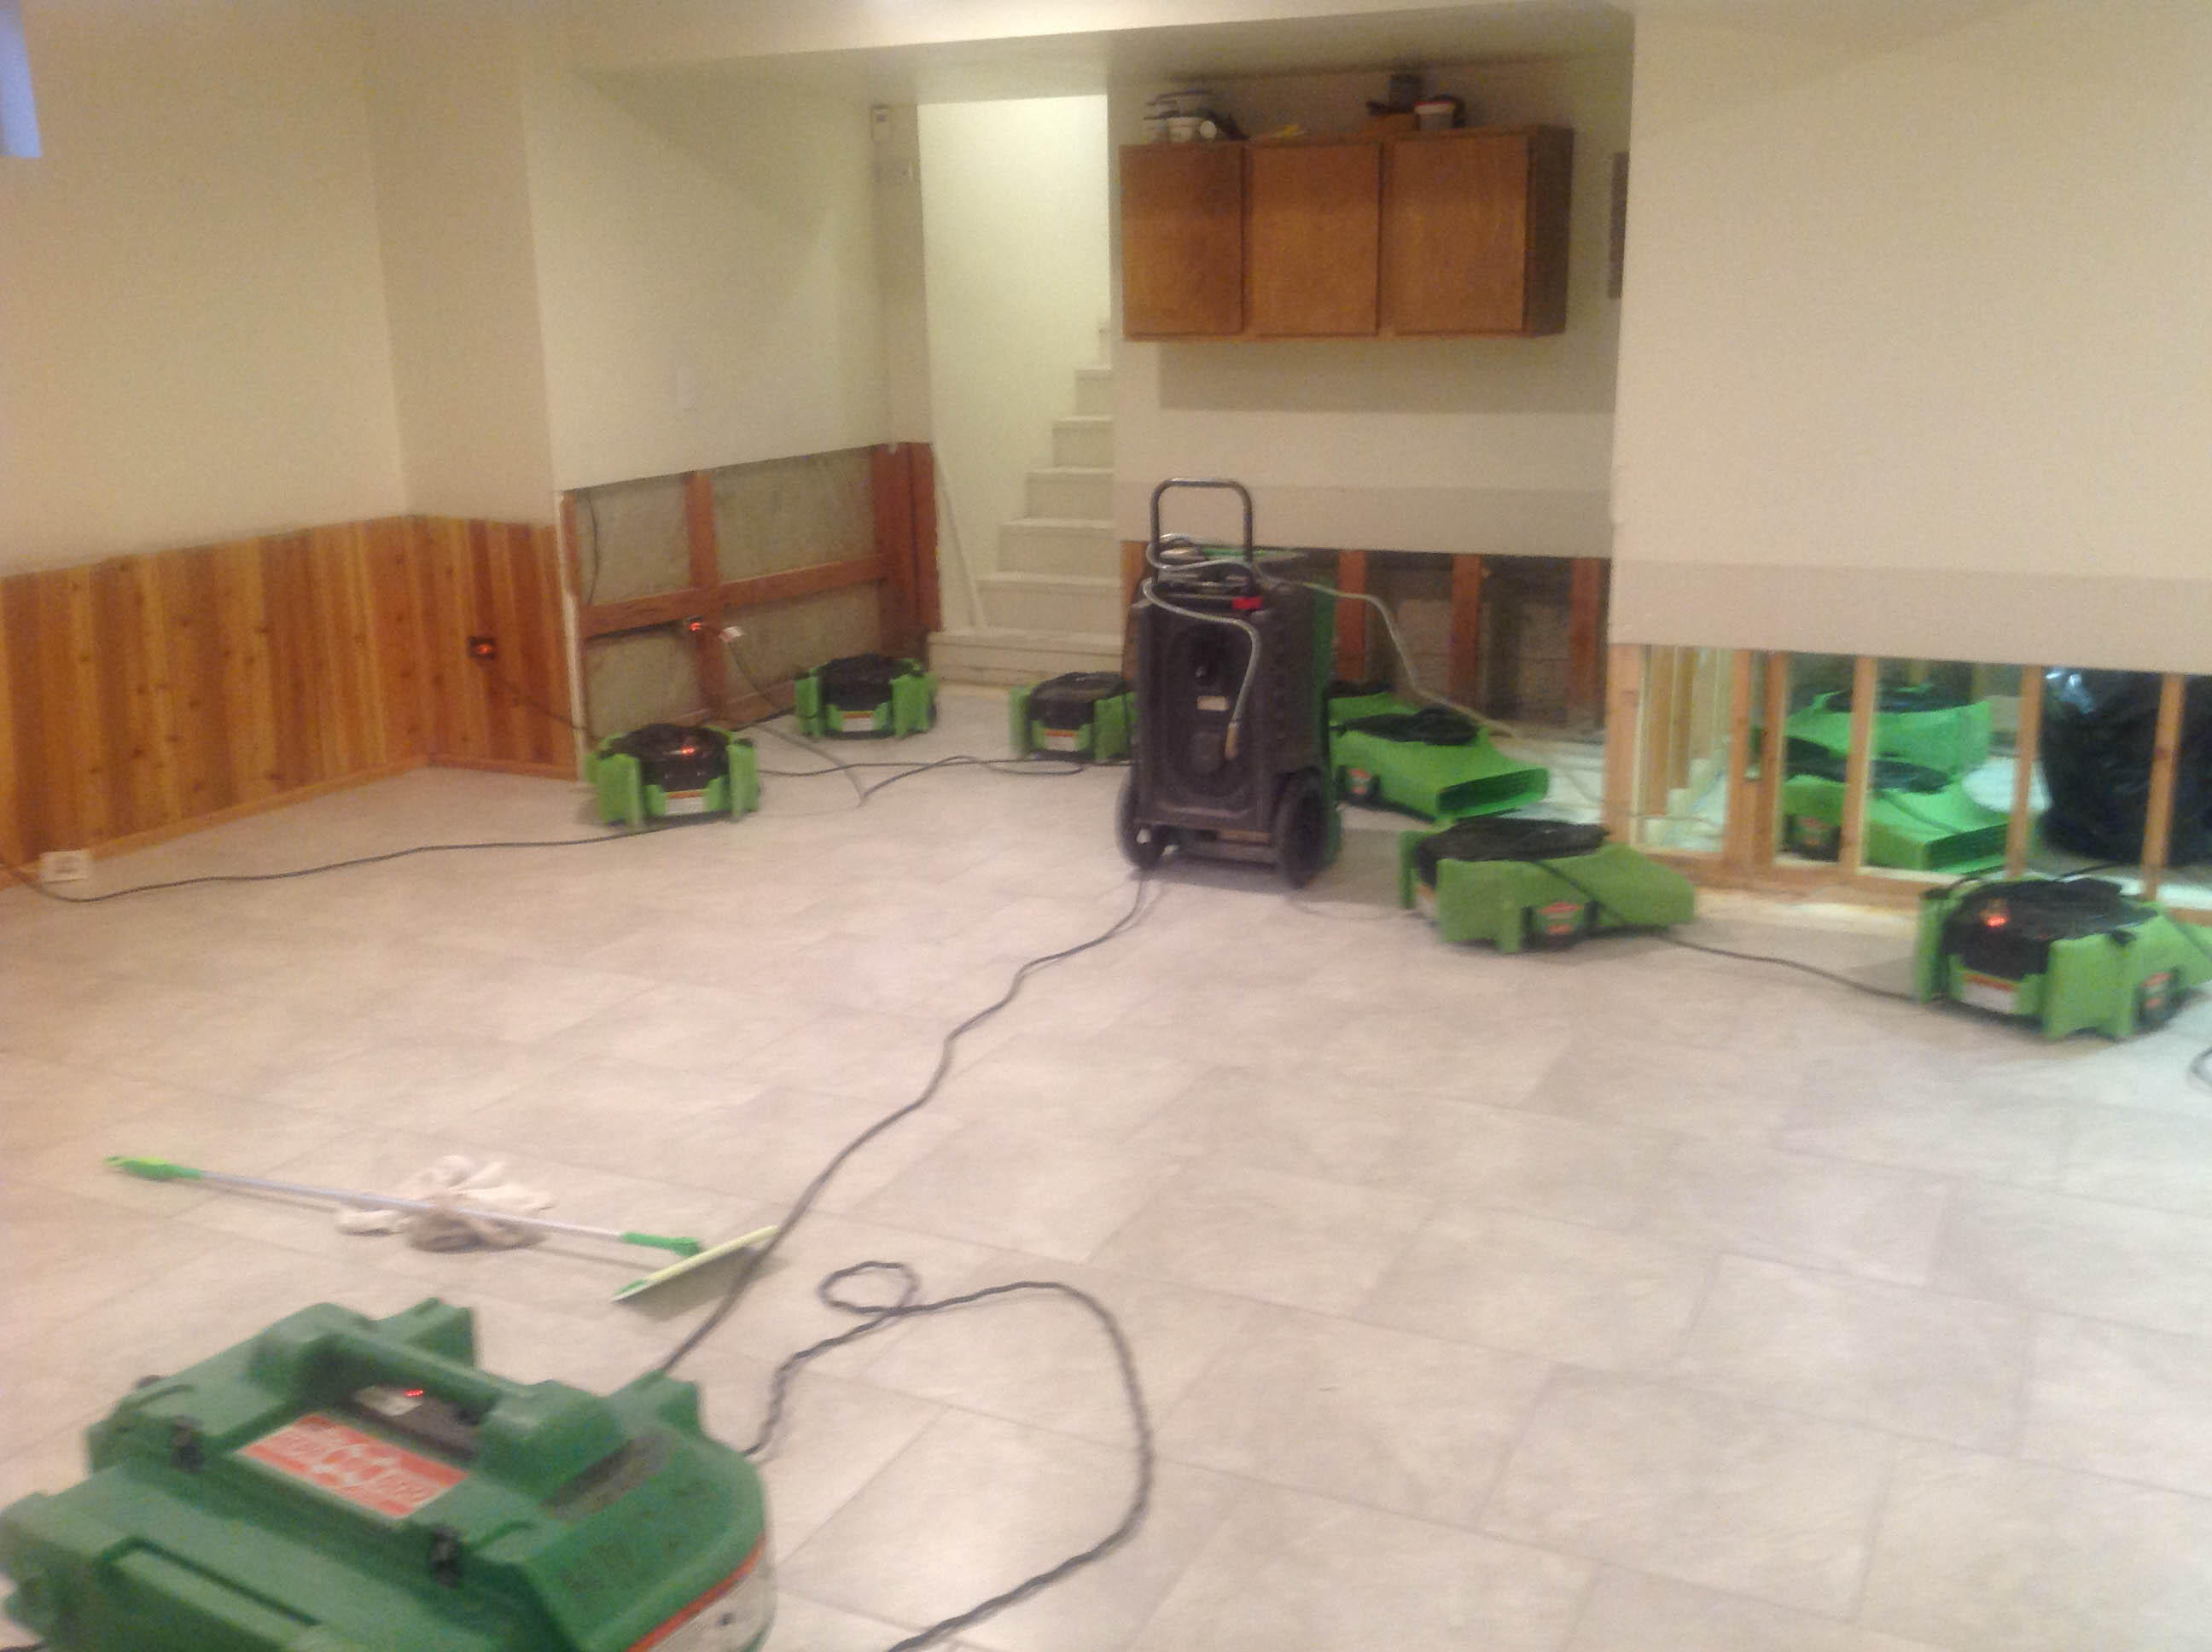 SERVPRO of East Bellevue has the proper training and the right equipment to get the job done right.